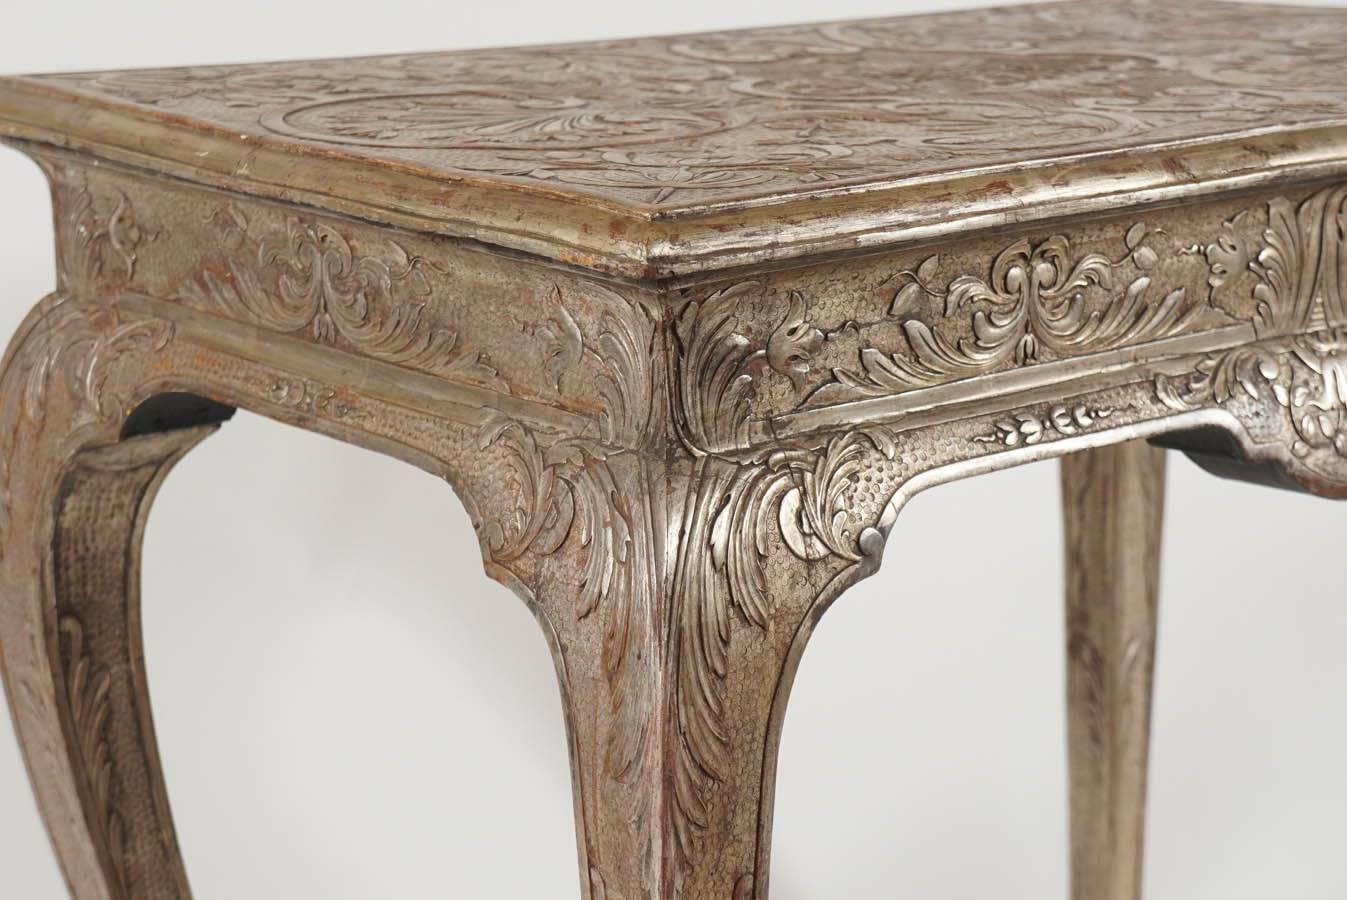 English George I Silvered Gesso Table, James Moore, England, circa 1715